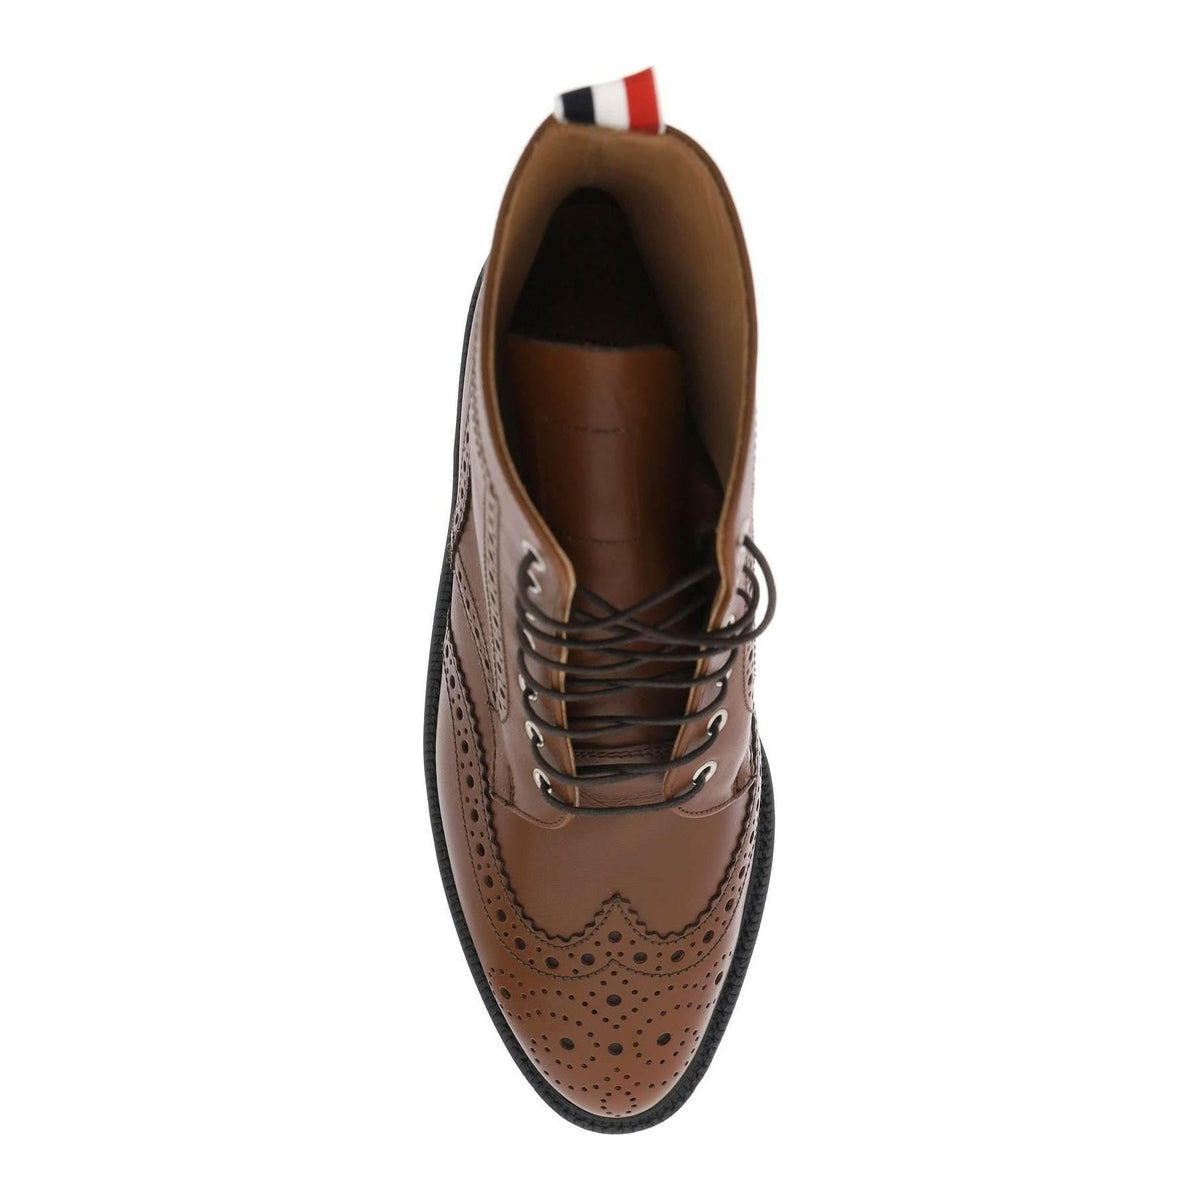 THOM BROWNE - Thom Browne Wingtip Ankle Boots With Brogue Details - JOHN JULIA